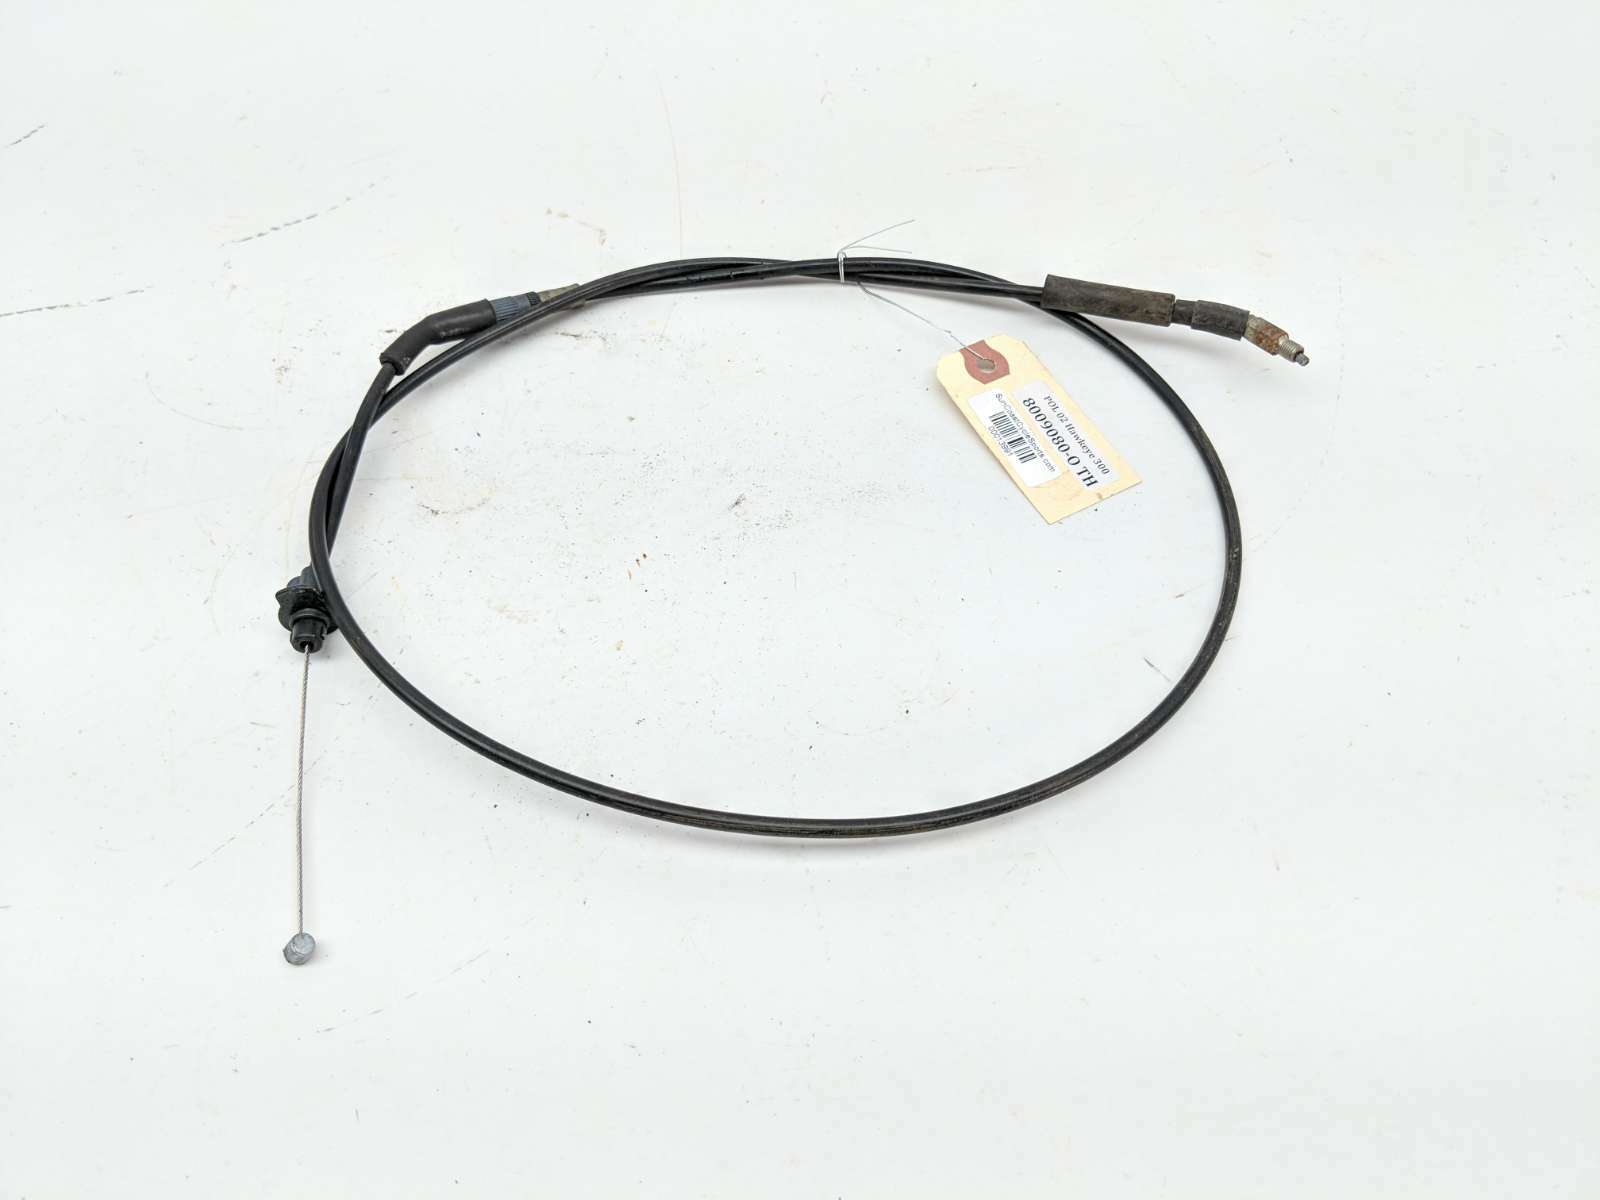 04 Polaris Hawkeye 300 4x4 Throttle Cable Cables